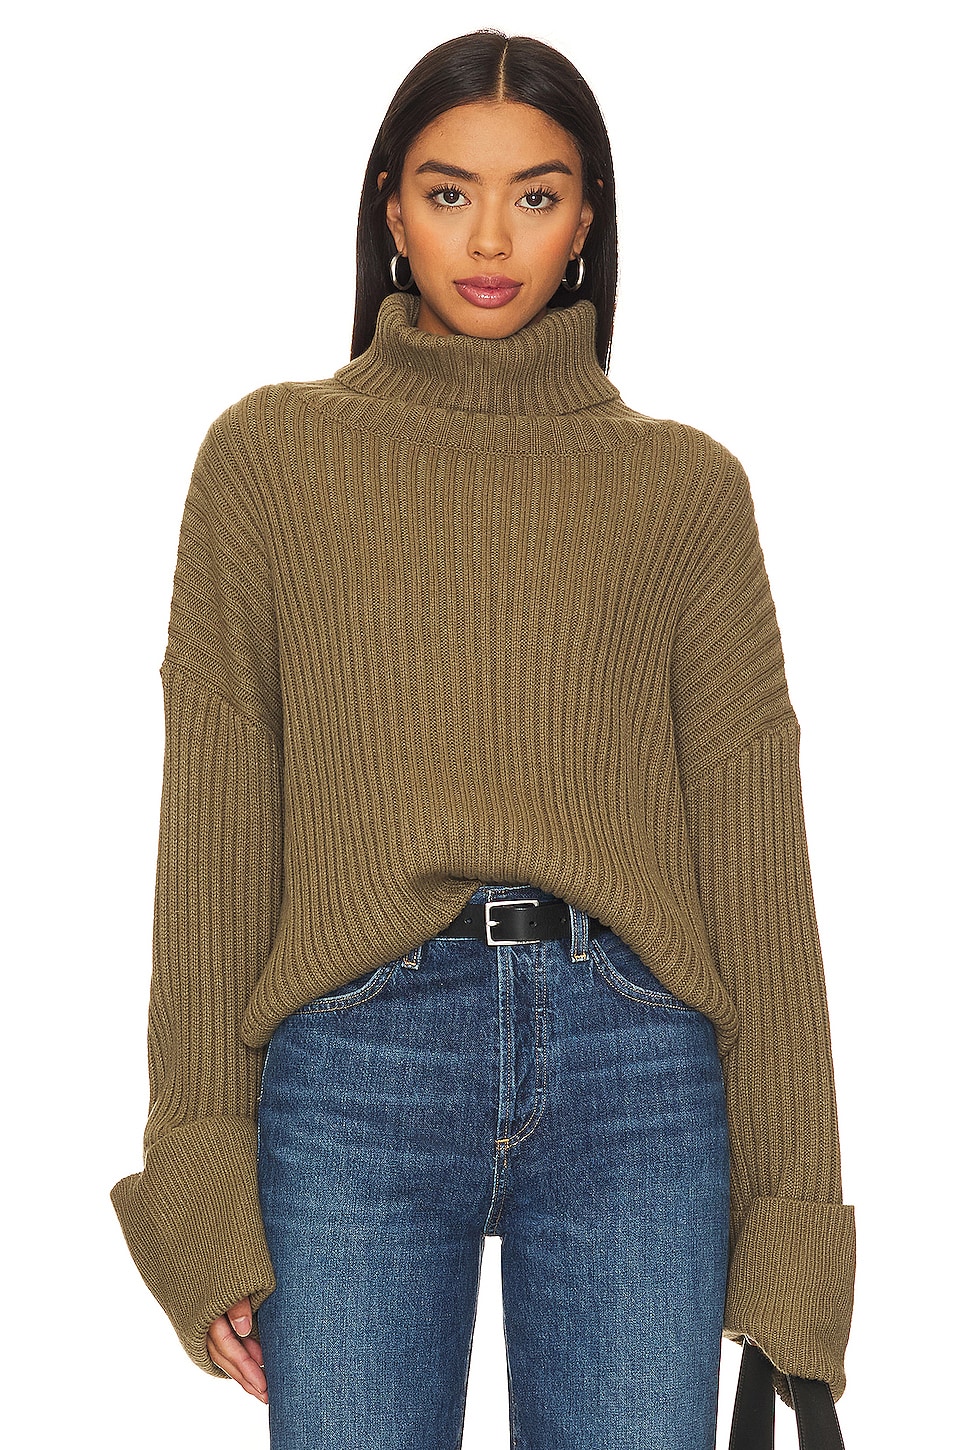 LBLC The Label Liam Sweater in Olive | REVOLVE